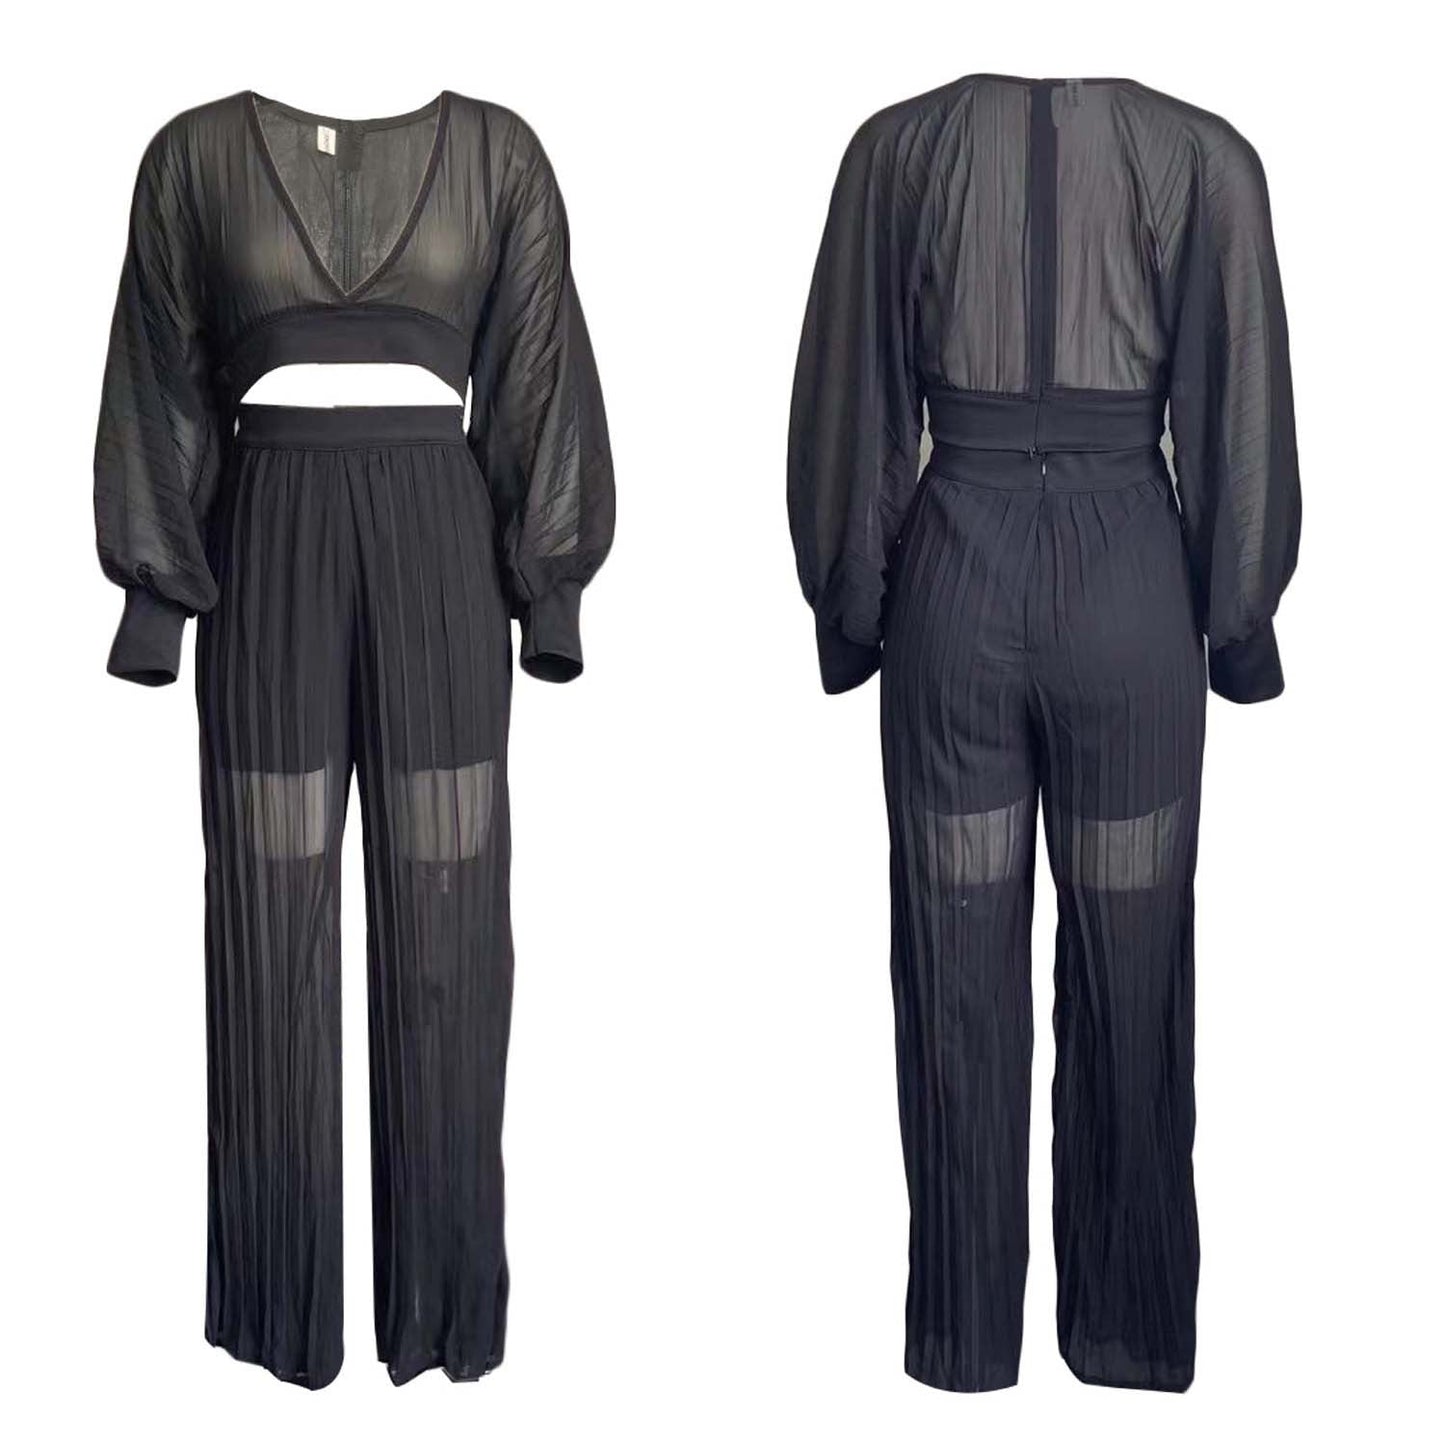 Sexy Women Two Pieces Long Sleeves Short Tops and Wide Legs Pants-Suits-Black-S-Free Shipping Leatheretro